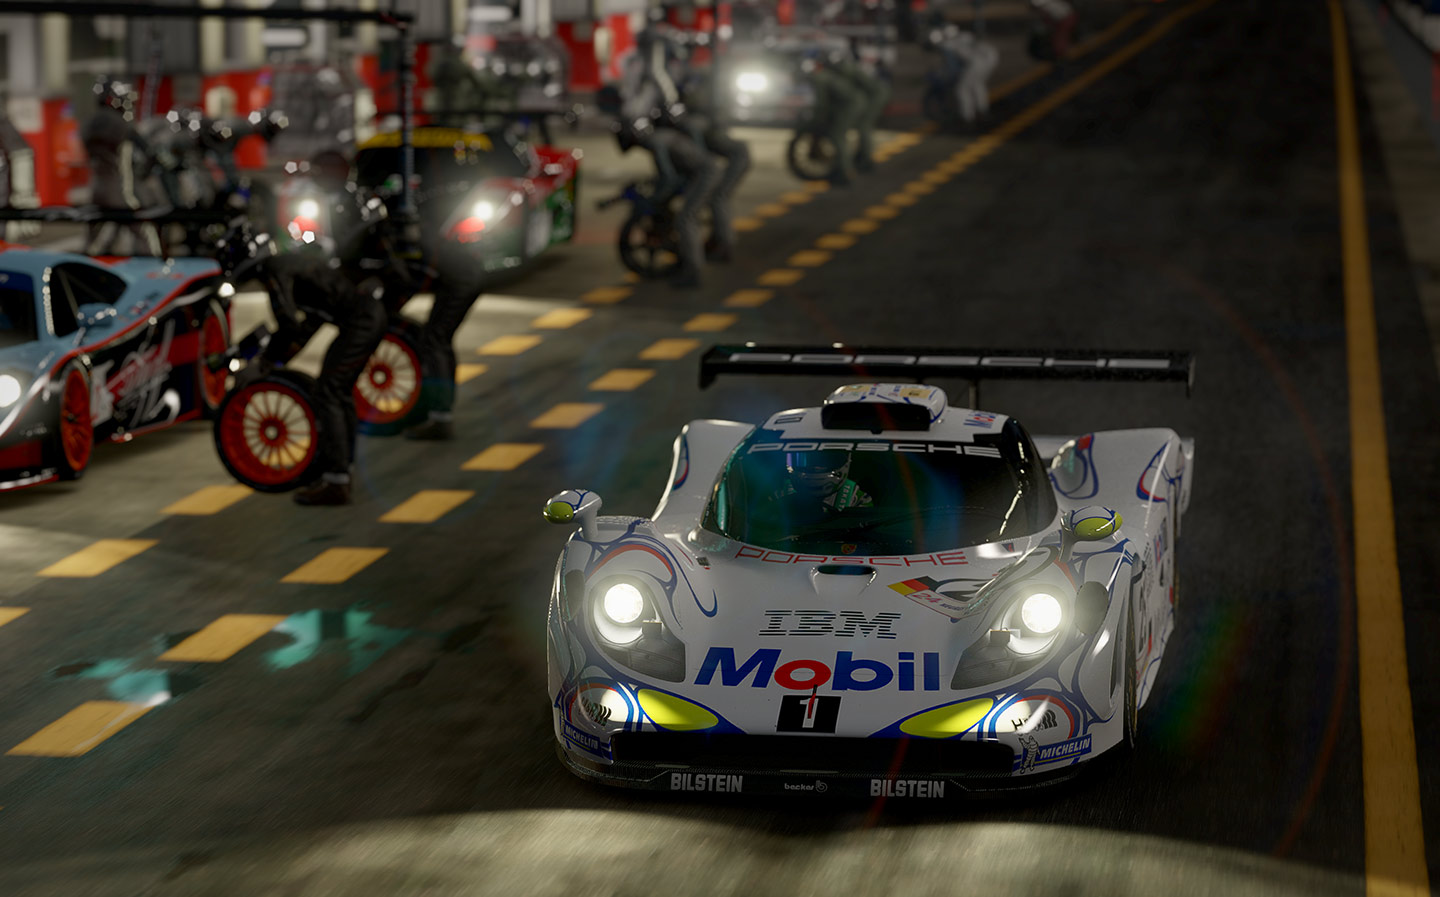 Keeping it real: Project Cars 2 review